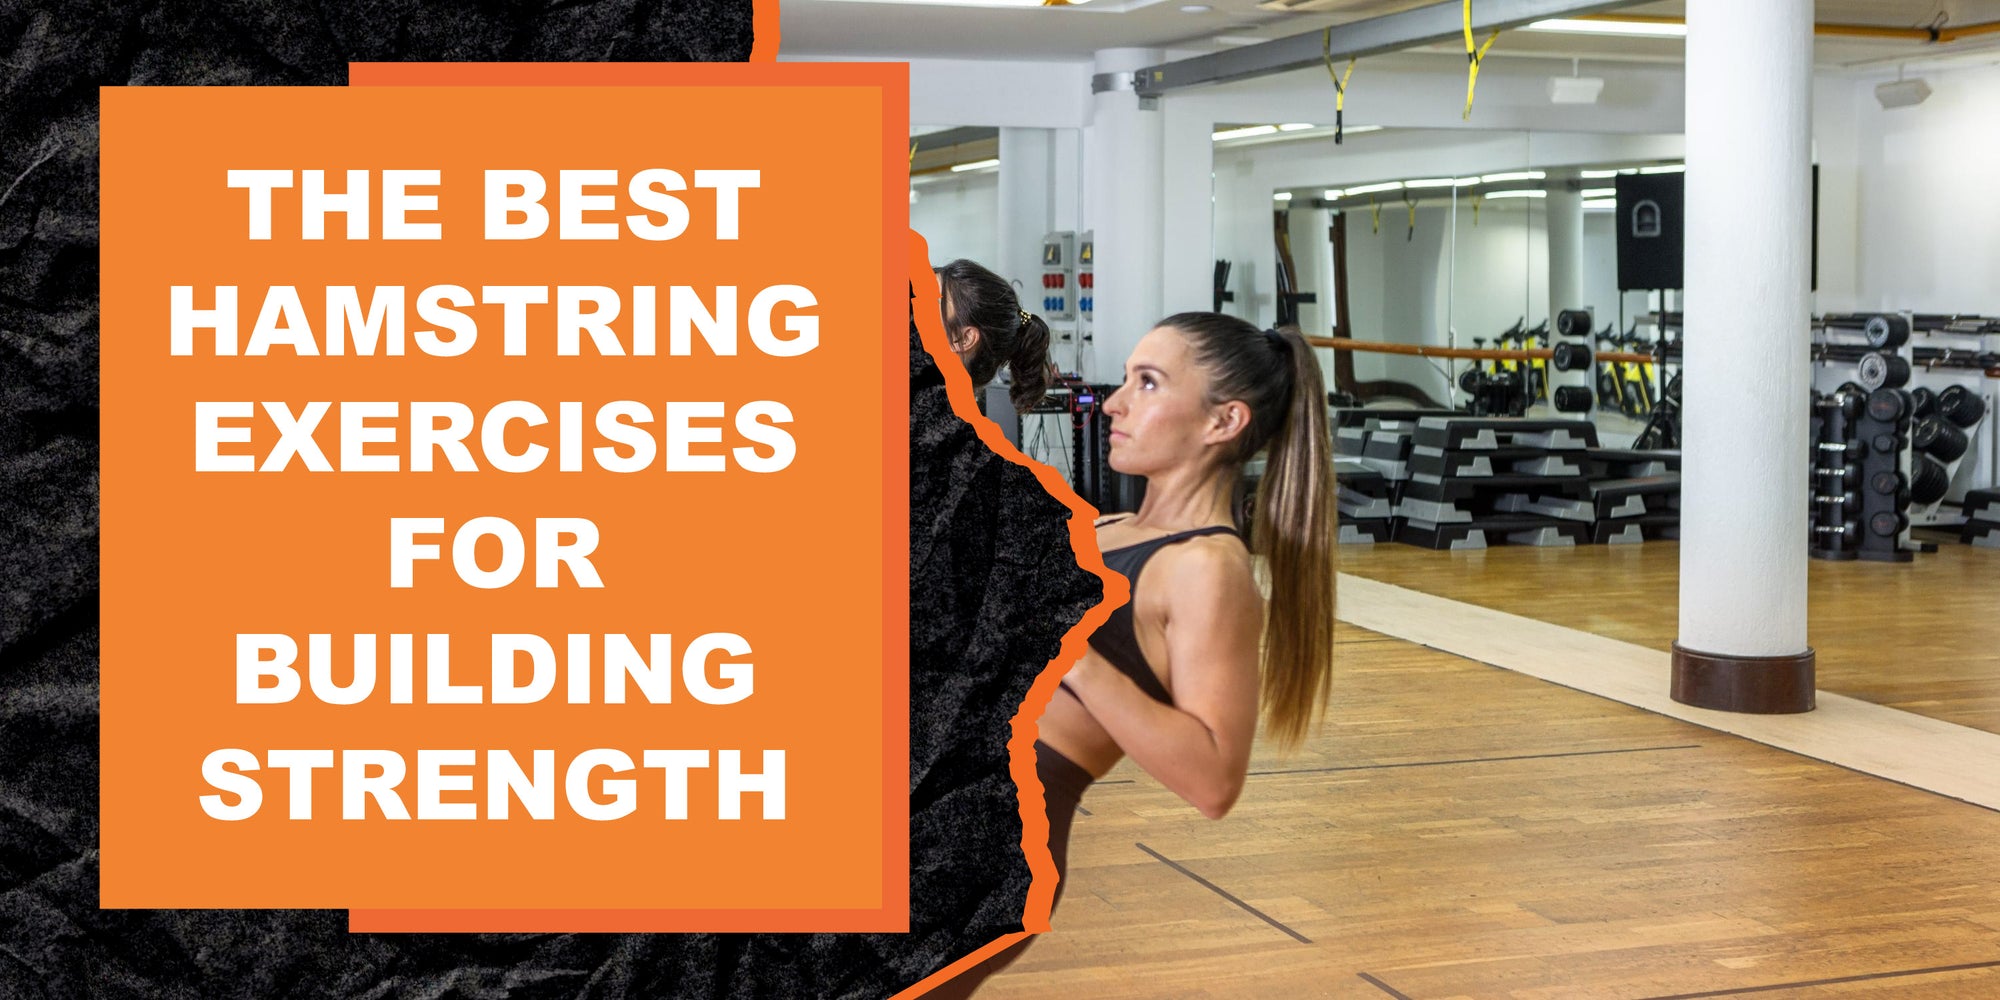 The Best Hamstring Exercises for Building Strength